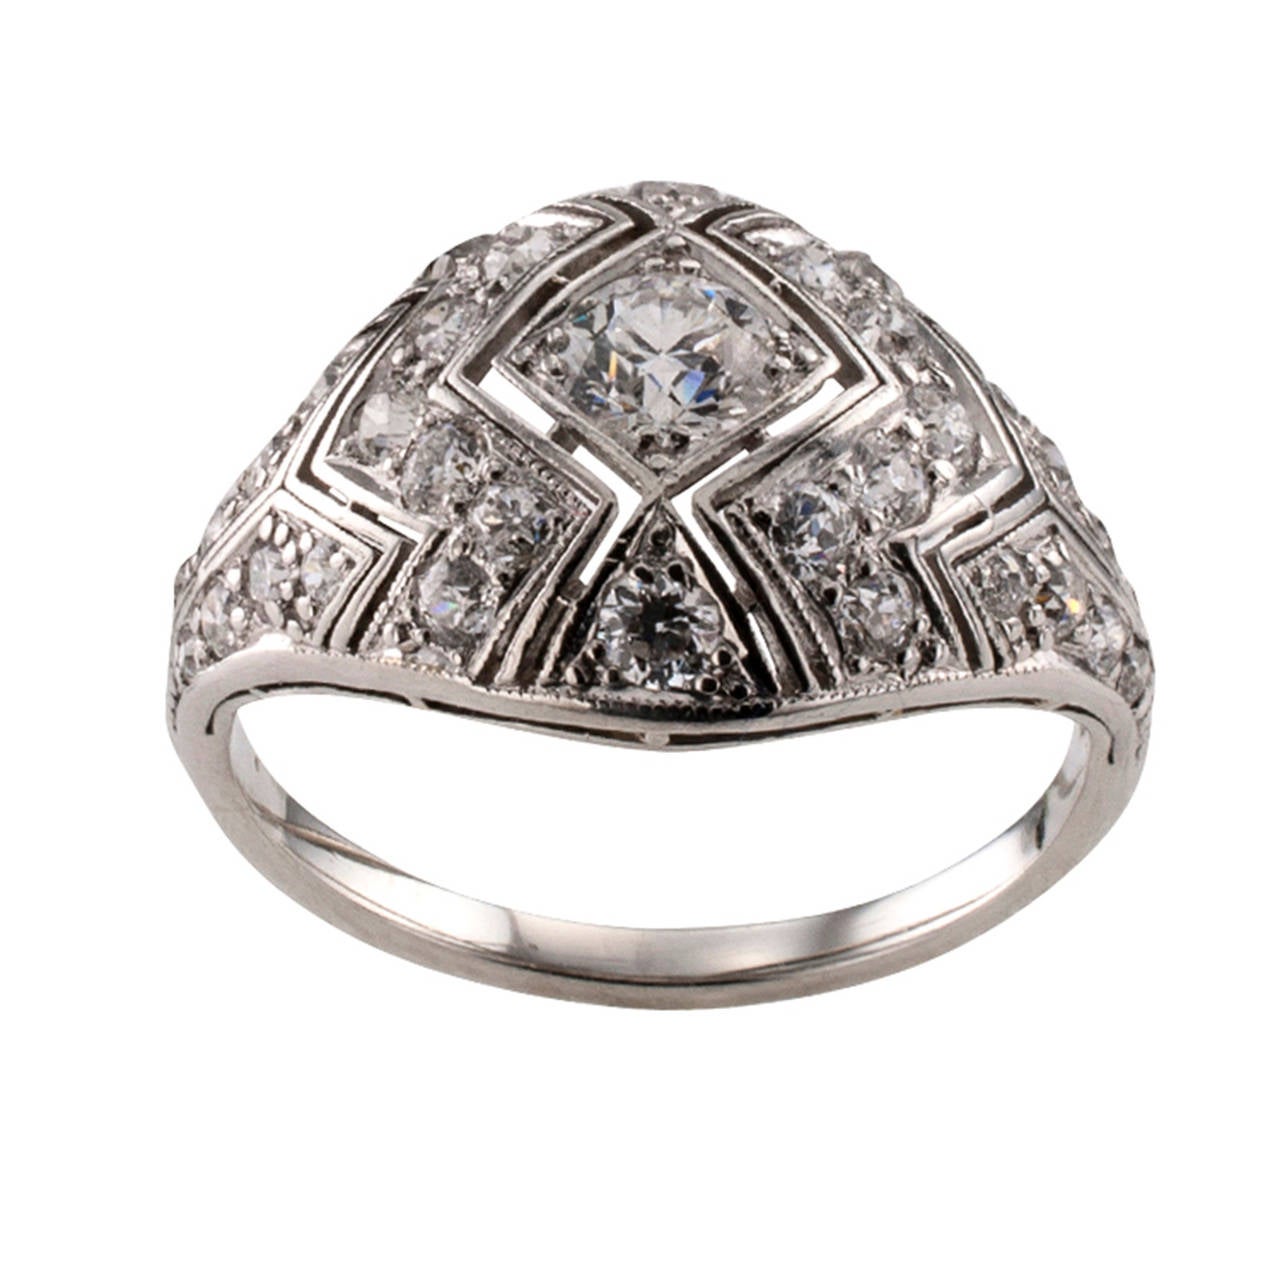 Circa 1925, this beautiful Art Deco ring with its slightly domed design is  decorated with open work and geometric motifs and set throughout with thirty-three old-cut round diamonds varying in size and totaling approximately 1.25 carats,